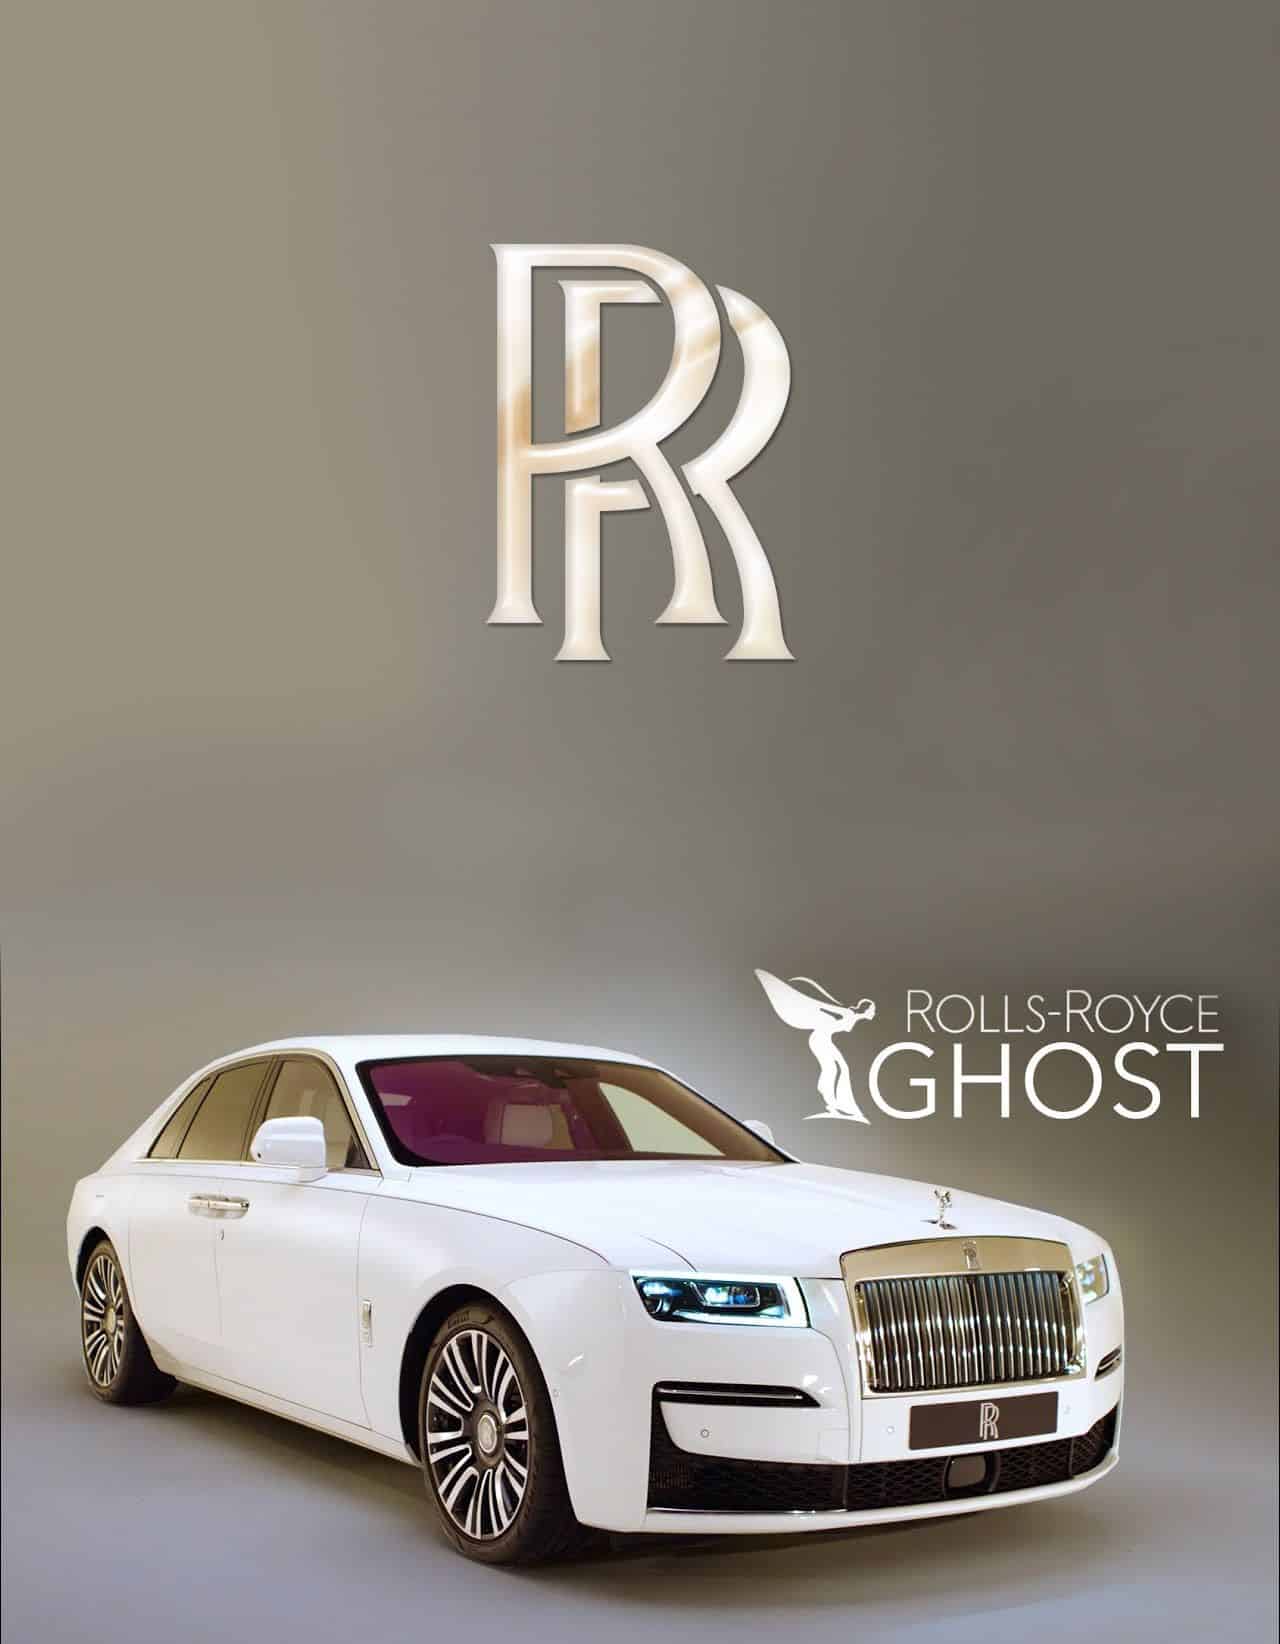 Pentagram launches new brand identity for RollsRoyce to appeal to a  younger audience  Creative Boom